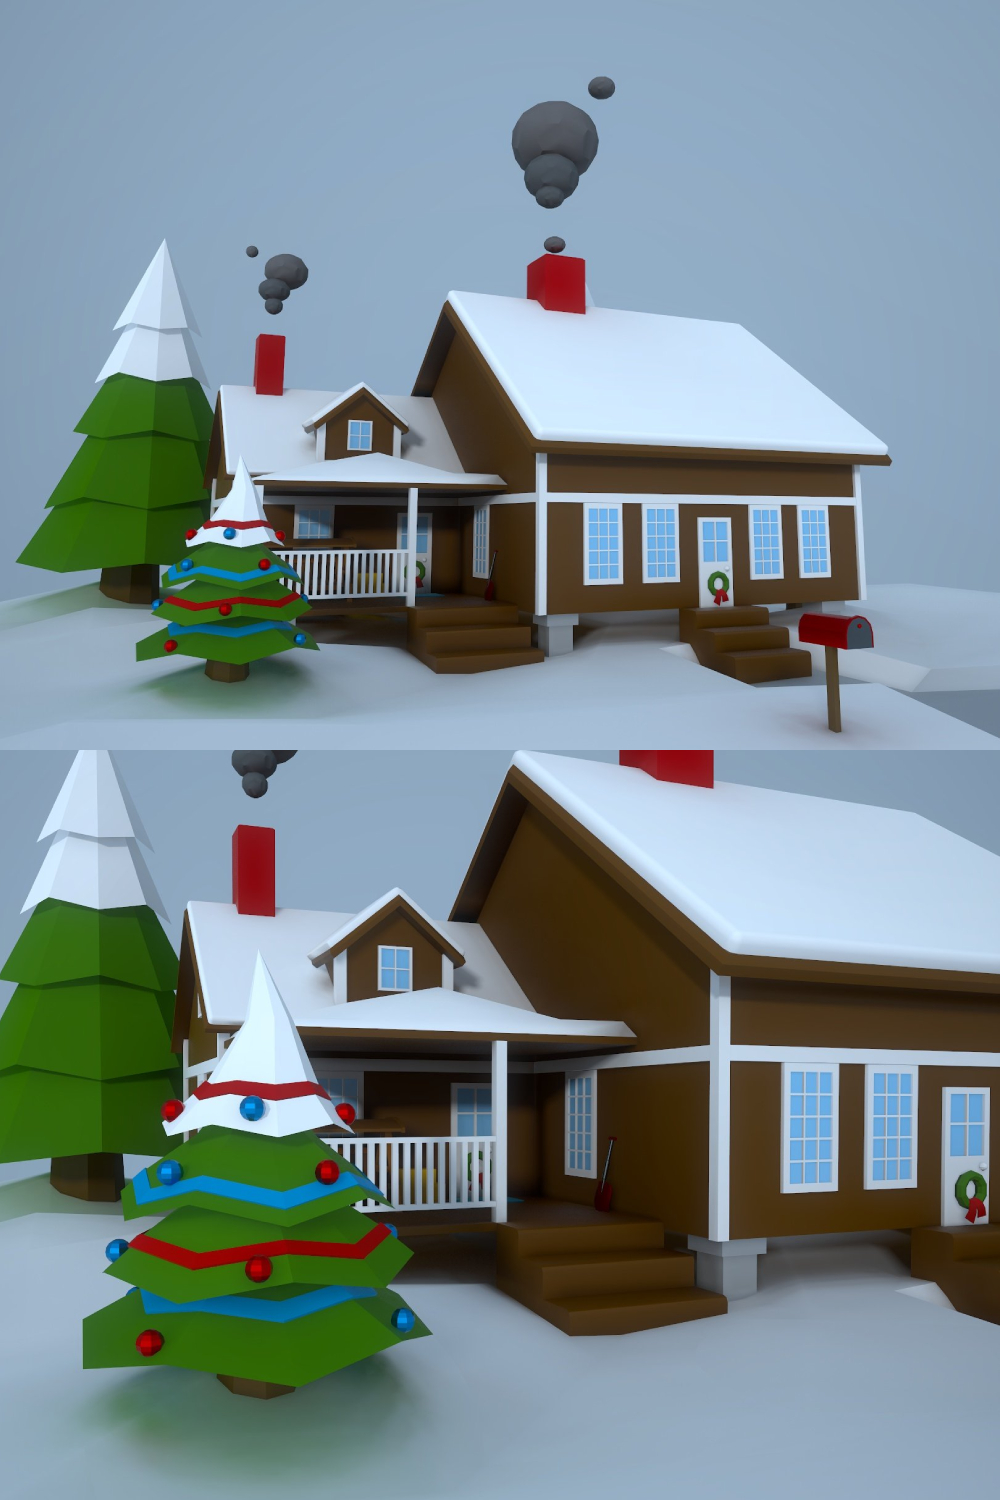 Low Poly House - Pinterest.